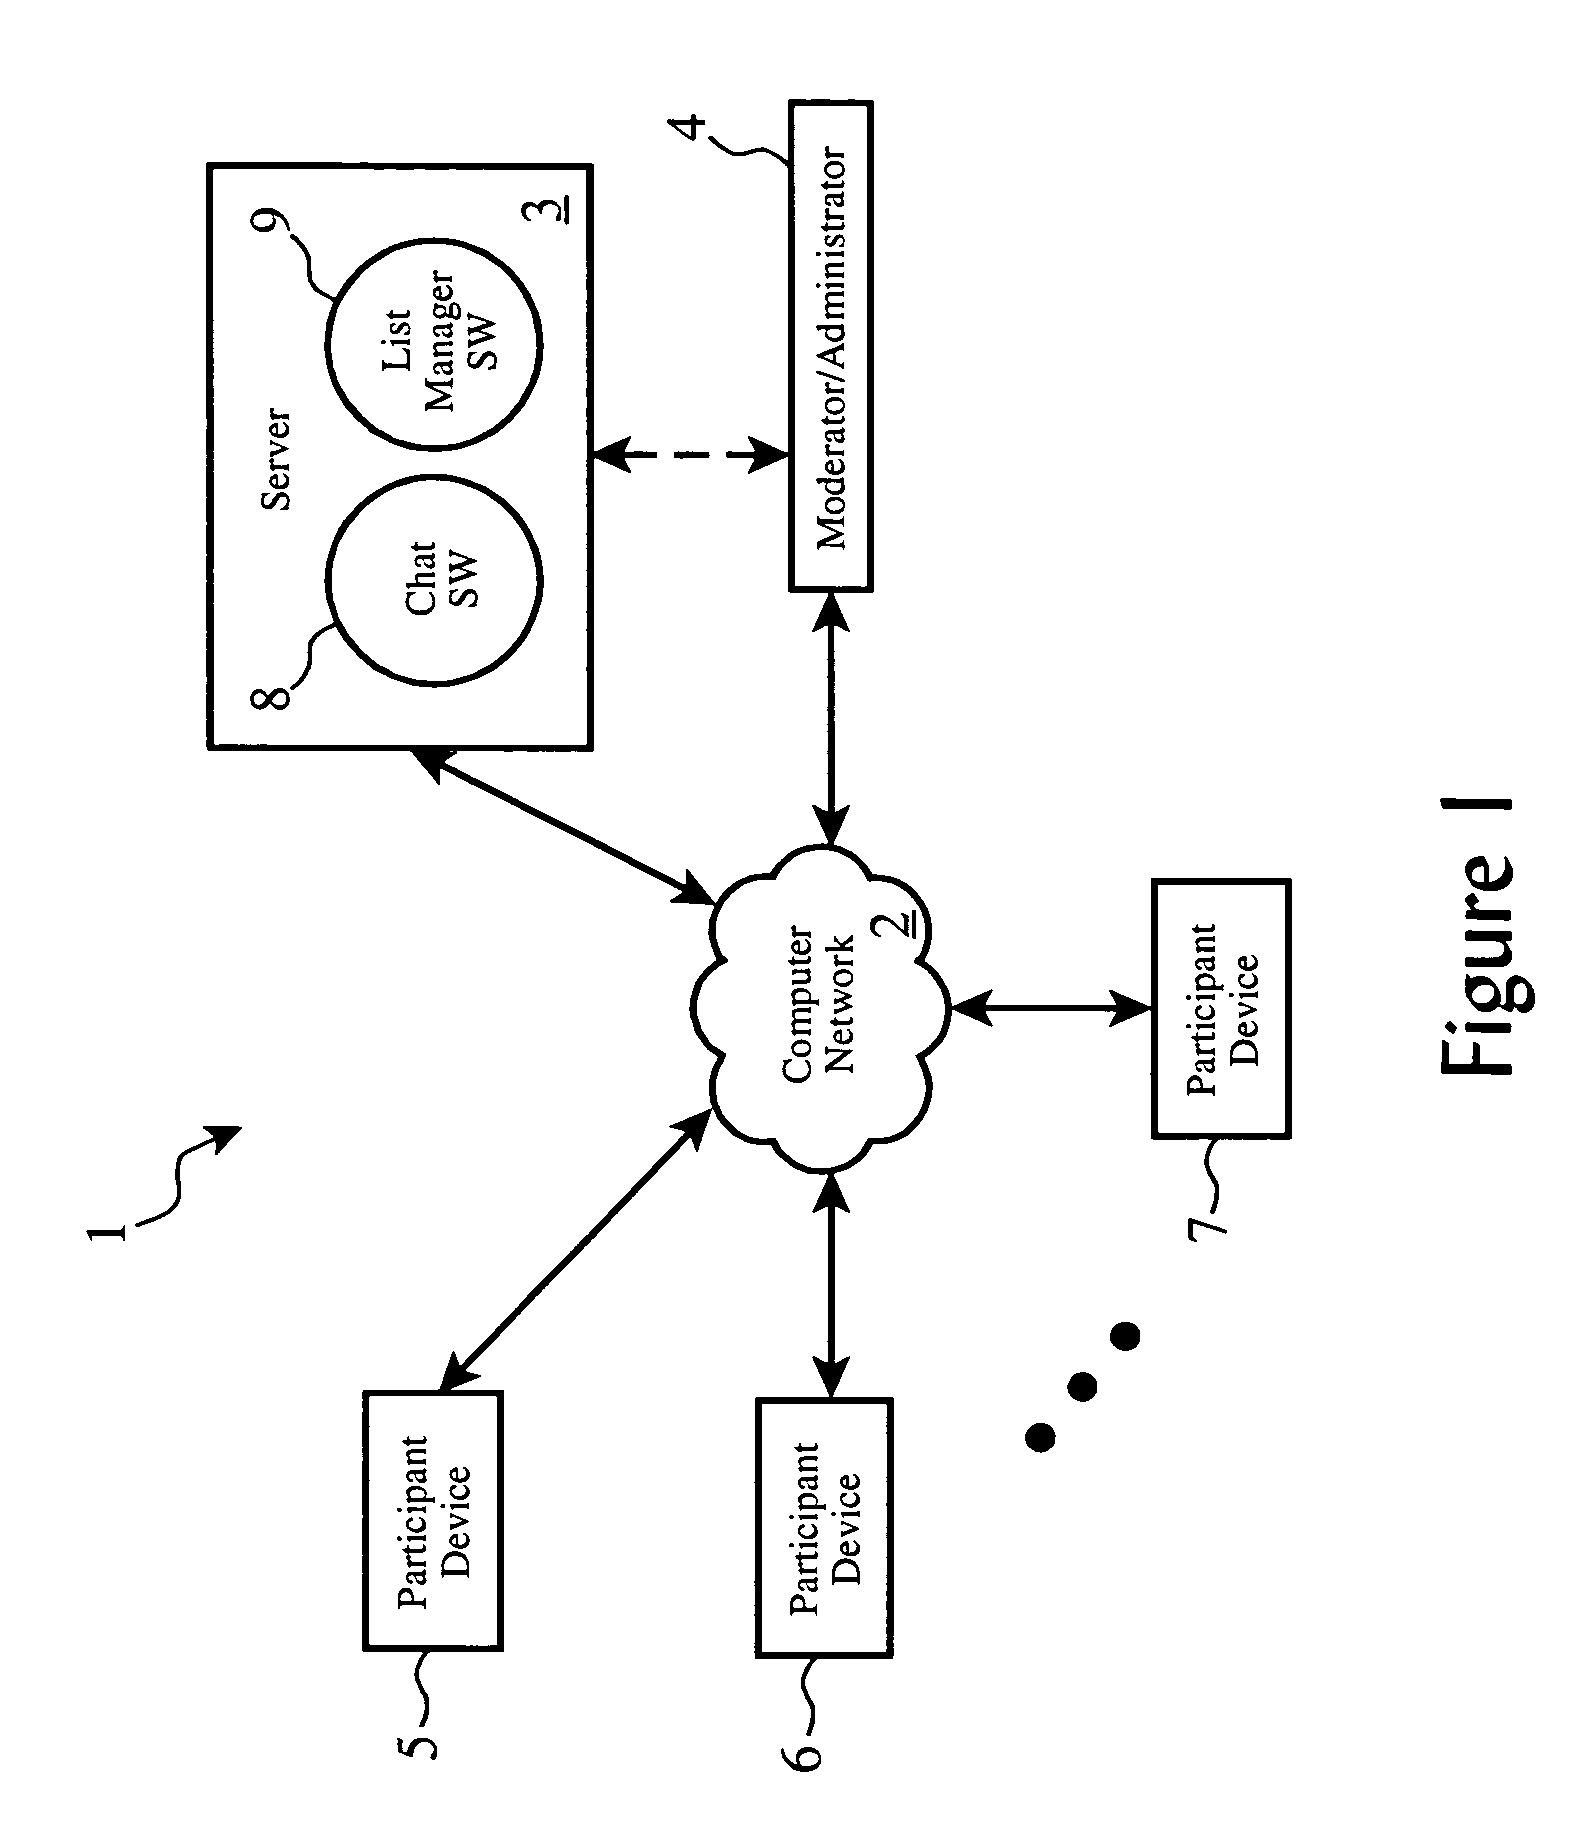 System and method enabling future messaging directives based on past participation via a history monitor